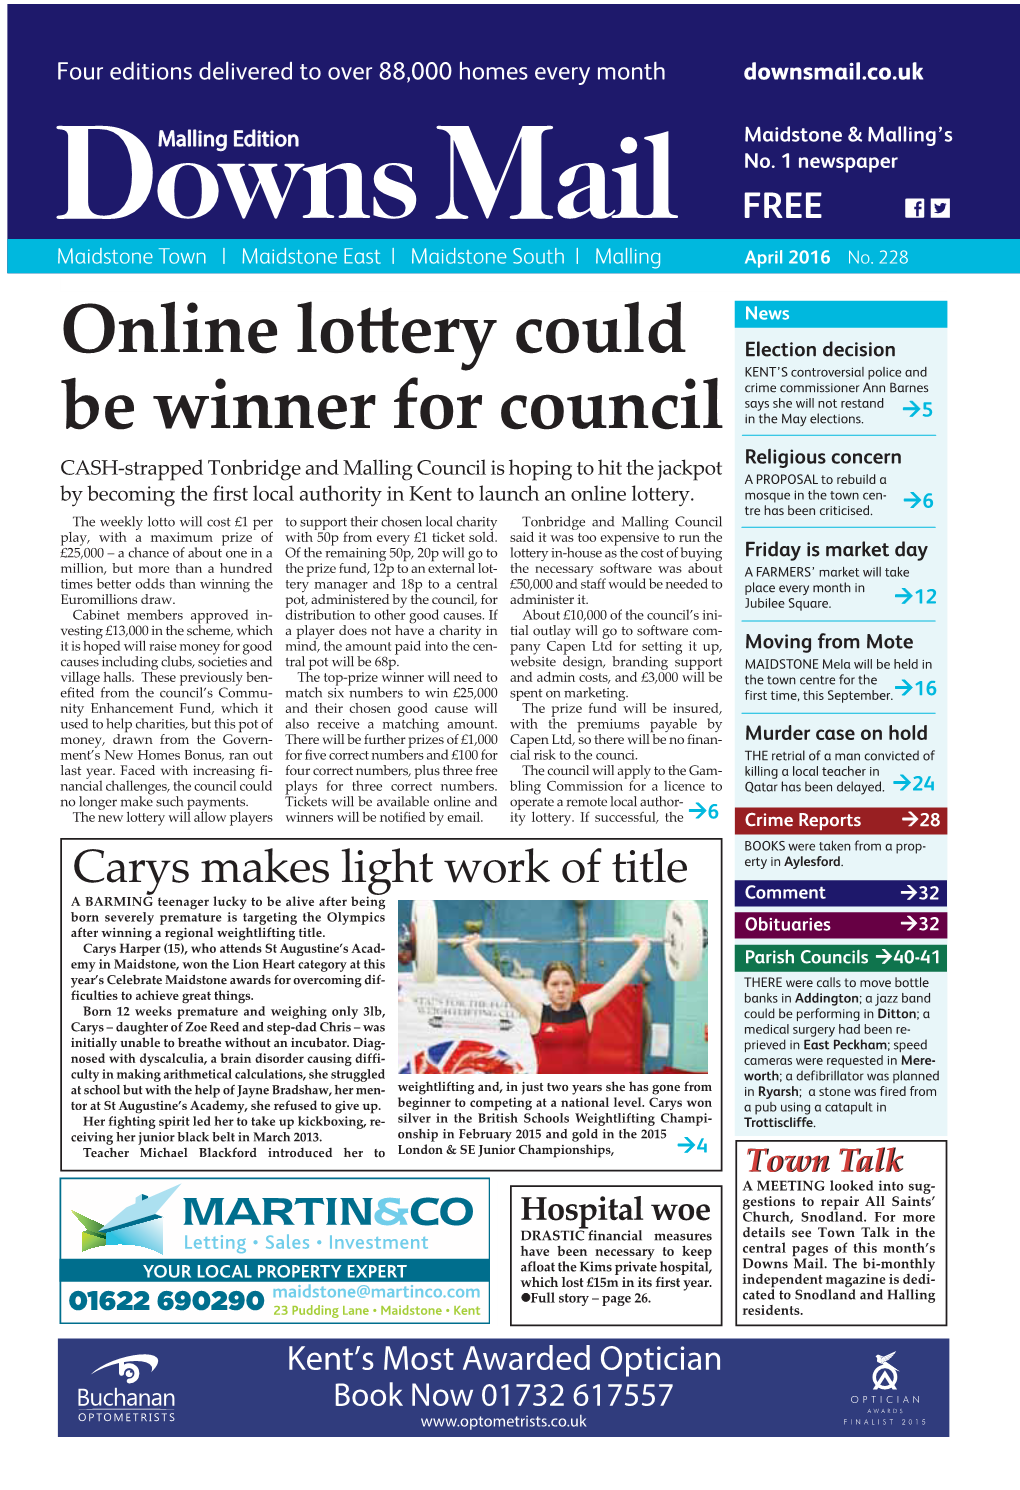 Online Lo Ery Could Be Winner for Council